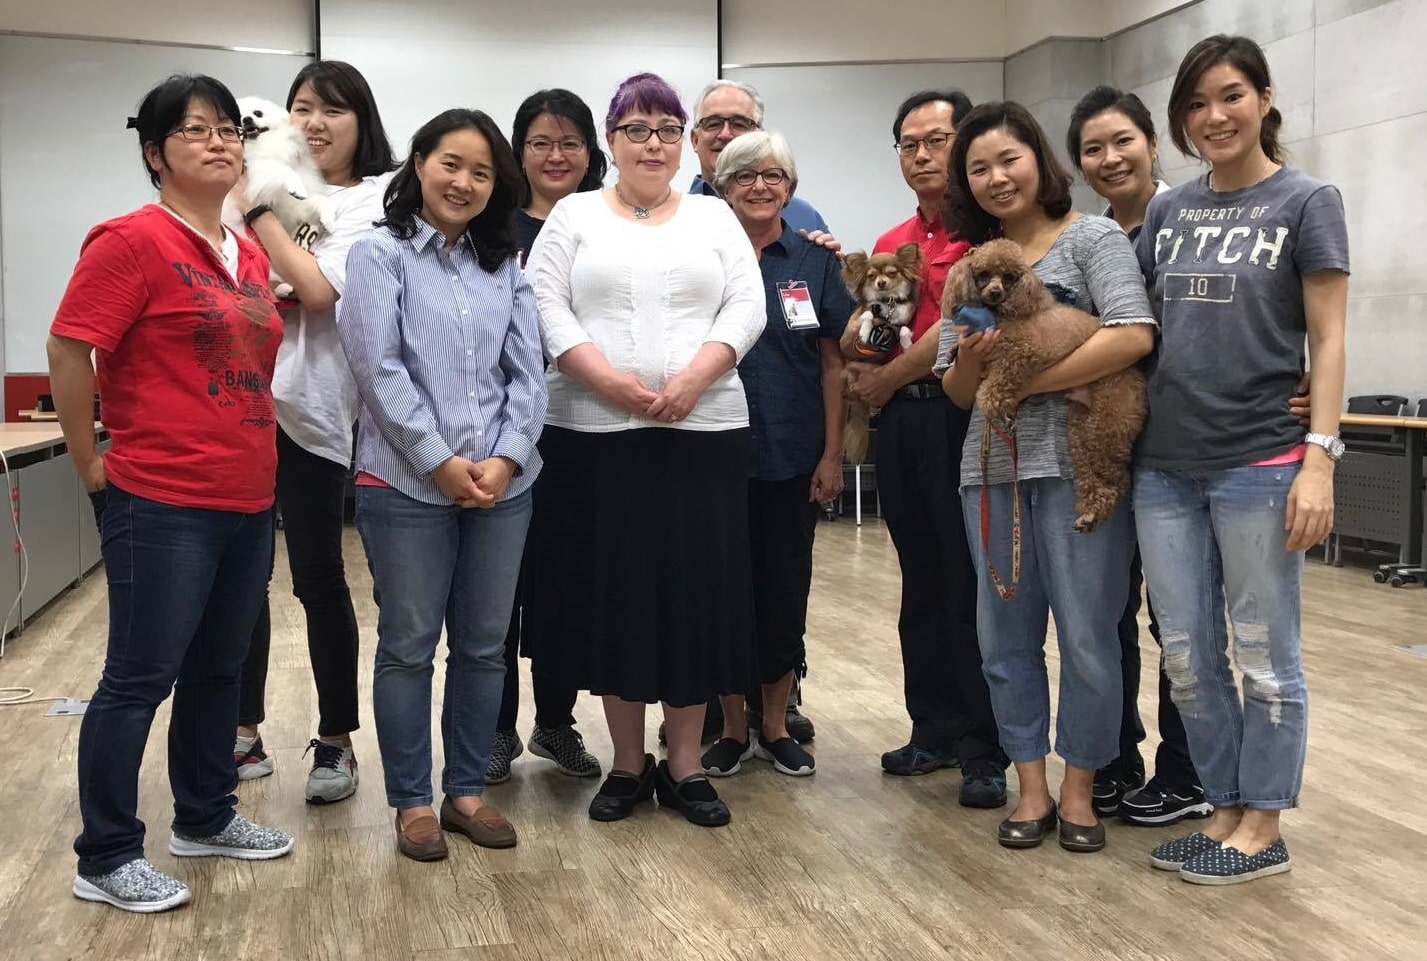 A group of people, some holding dogs, pose for a photo. Most of the people are Korean; three are caucasian.